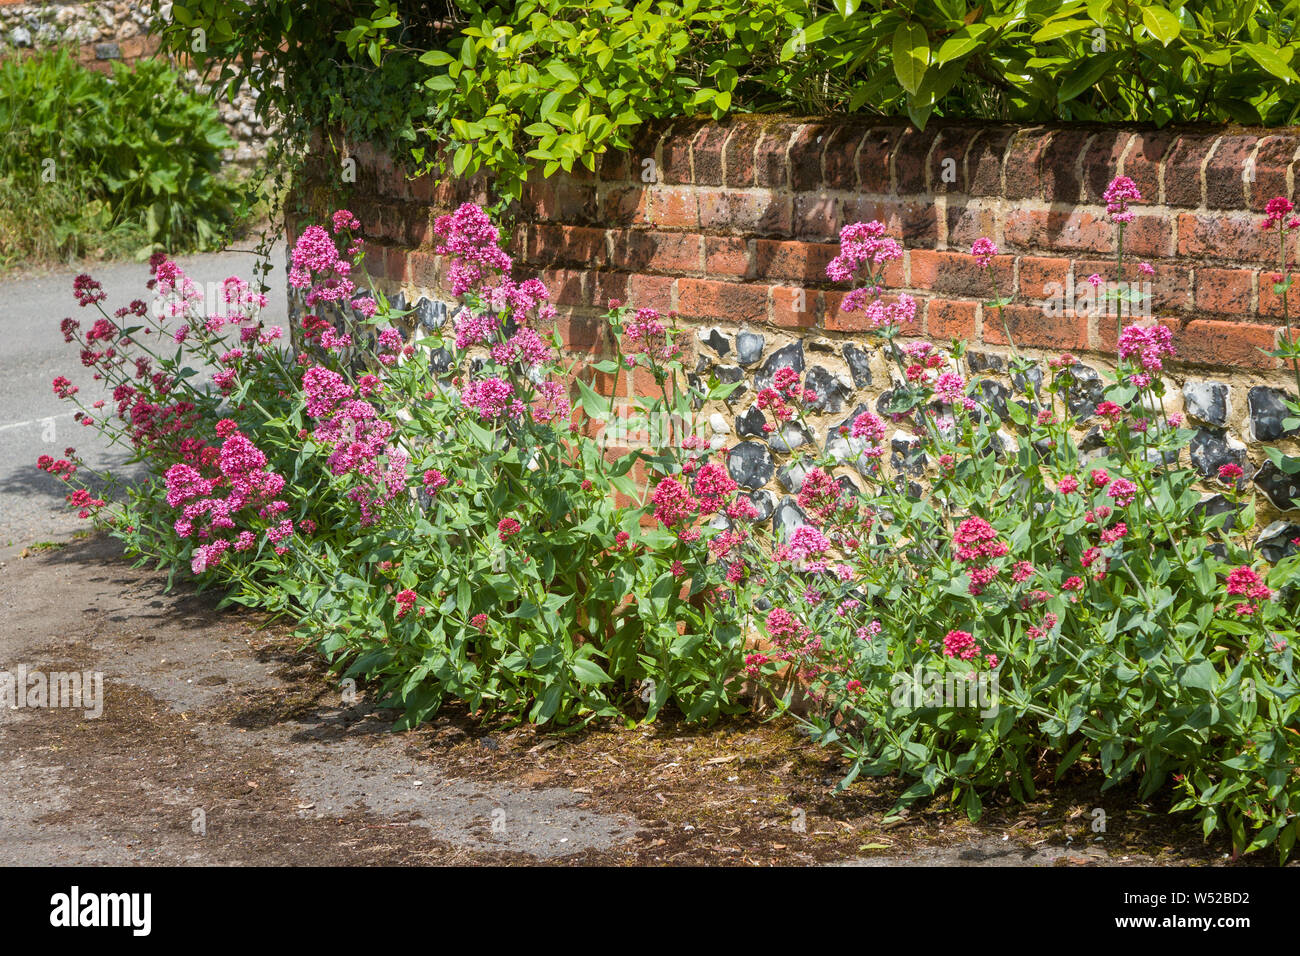 Flowers of Red Valerian or Jupiter's Beard grow wild from the base of a brick and flint wall in the village of South Stoke, Oxfordshire Stock Photo